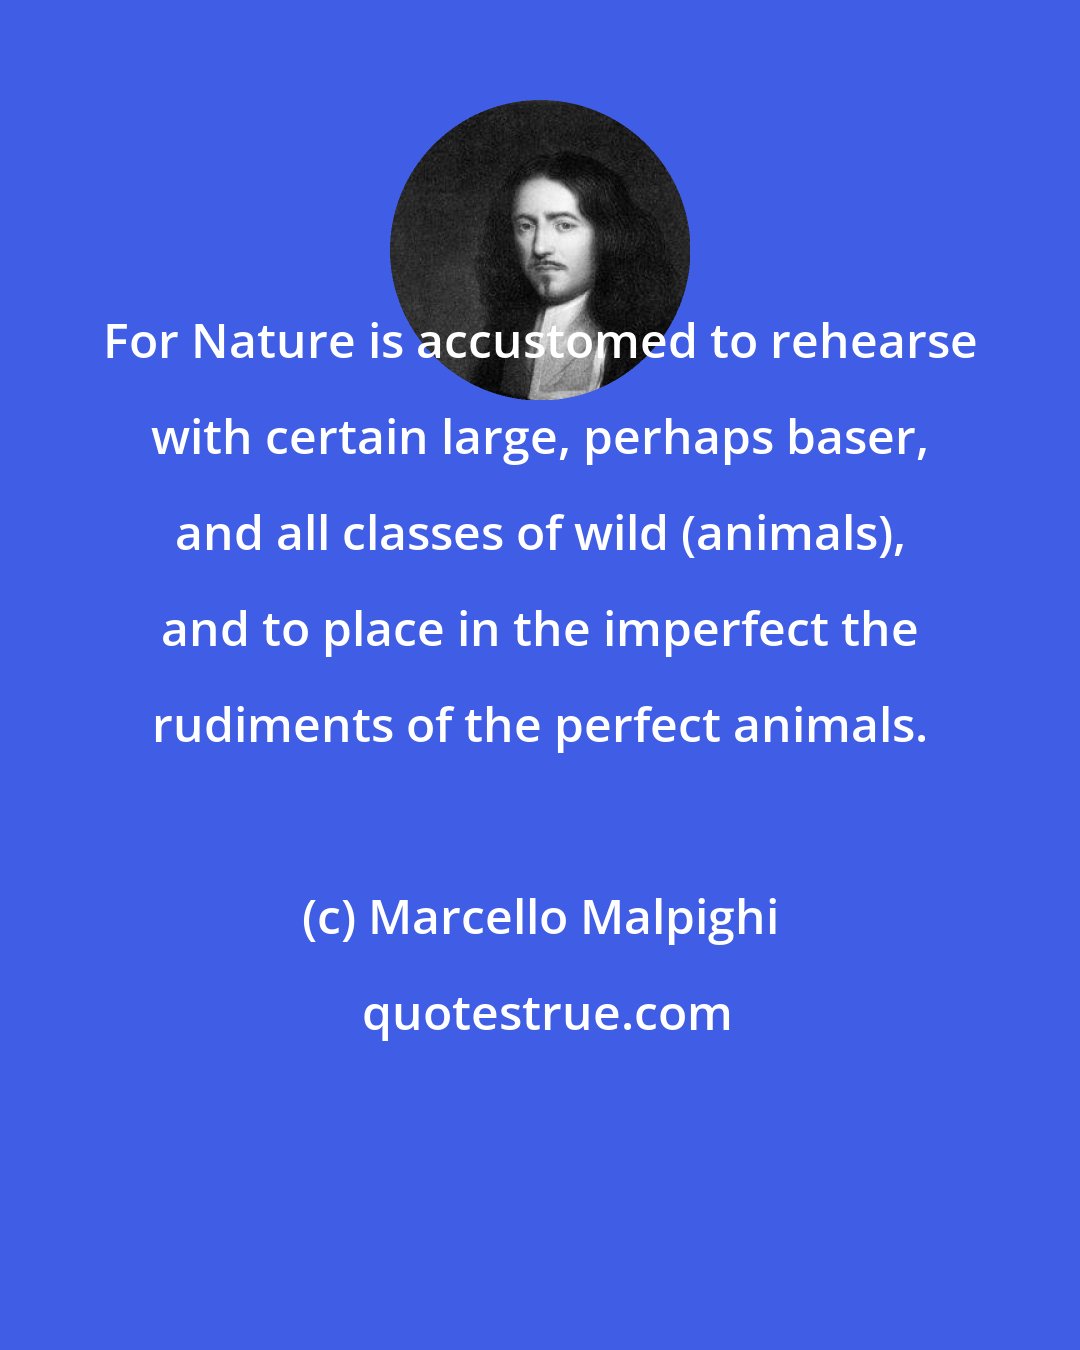 Marcello Malpighi: For Nature is accustomed to rehearse with certain large, perhaps baser, and all classes of wild (animals), and to place in the imperfect the rudiments of the perfect animals.